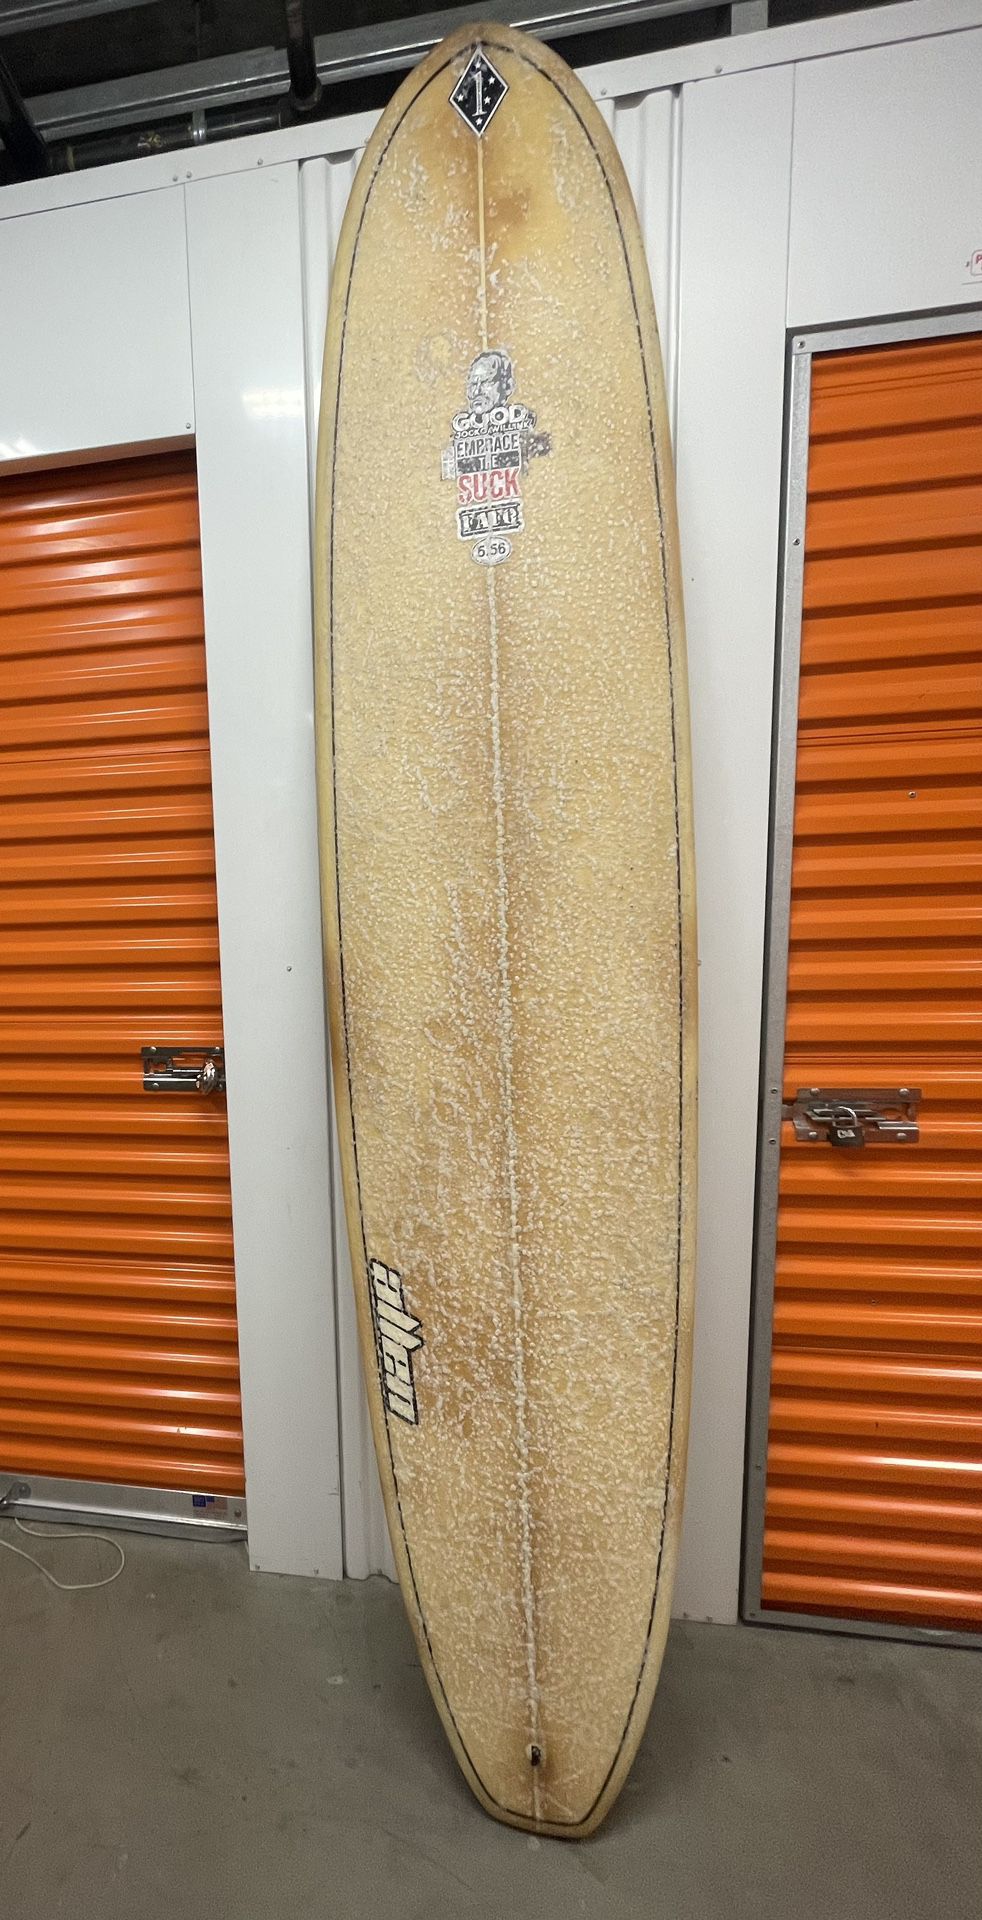 Midlength Surfboard